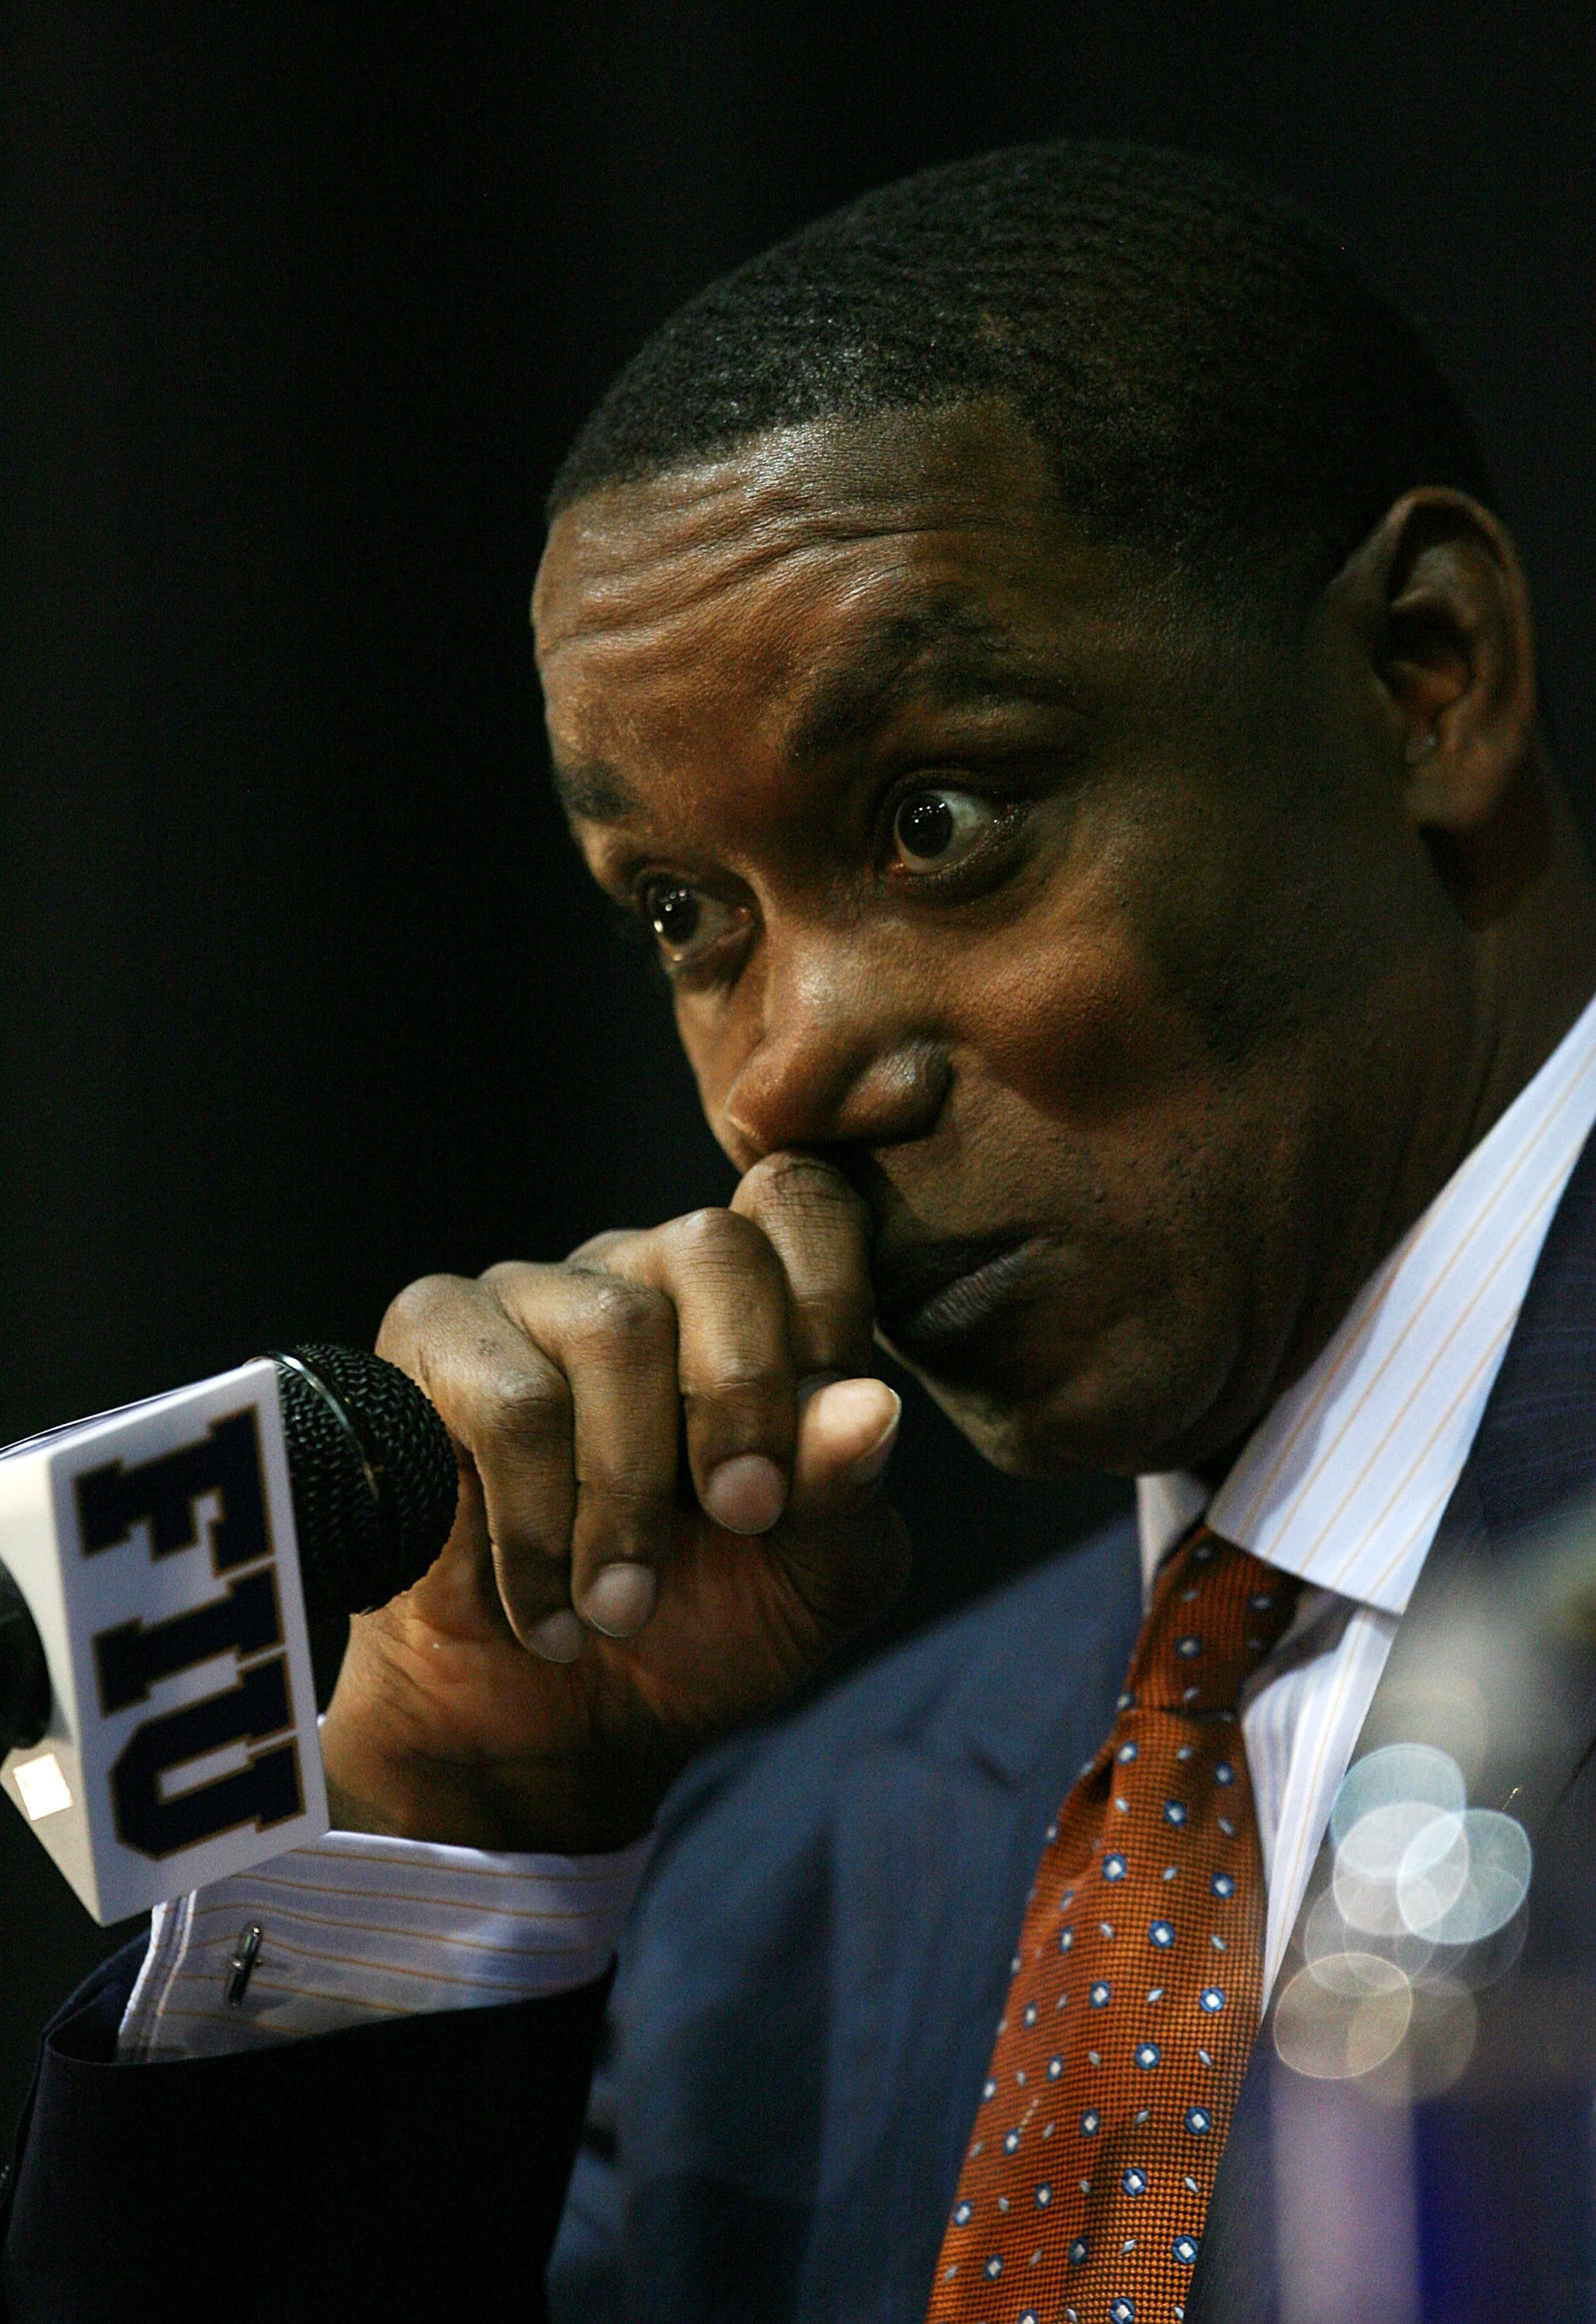 MIAMI - APRIL 15:  Isiah Thomas talks to the media after he was introduced as the new head coach for Florida International Univeristy men's basketball team at U.S.Century Bank Arena on April 15, 2009 in Miami, Florida.  (Photo by Doug Benc/Getty Images)